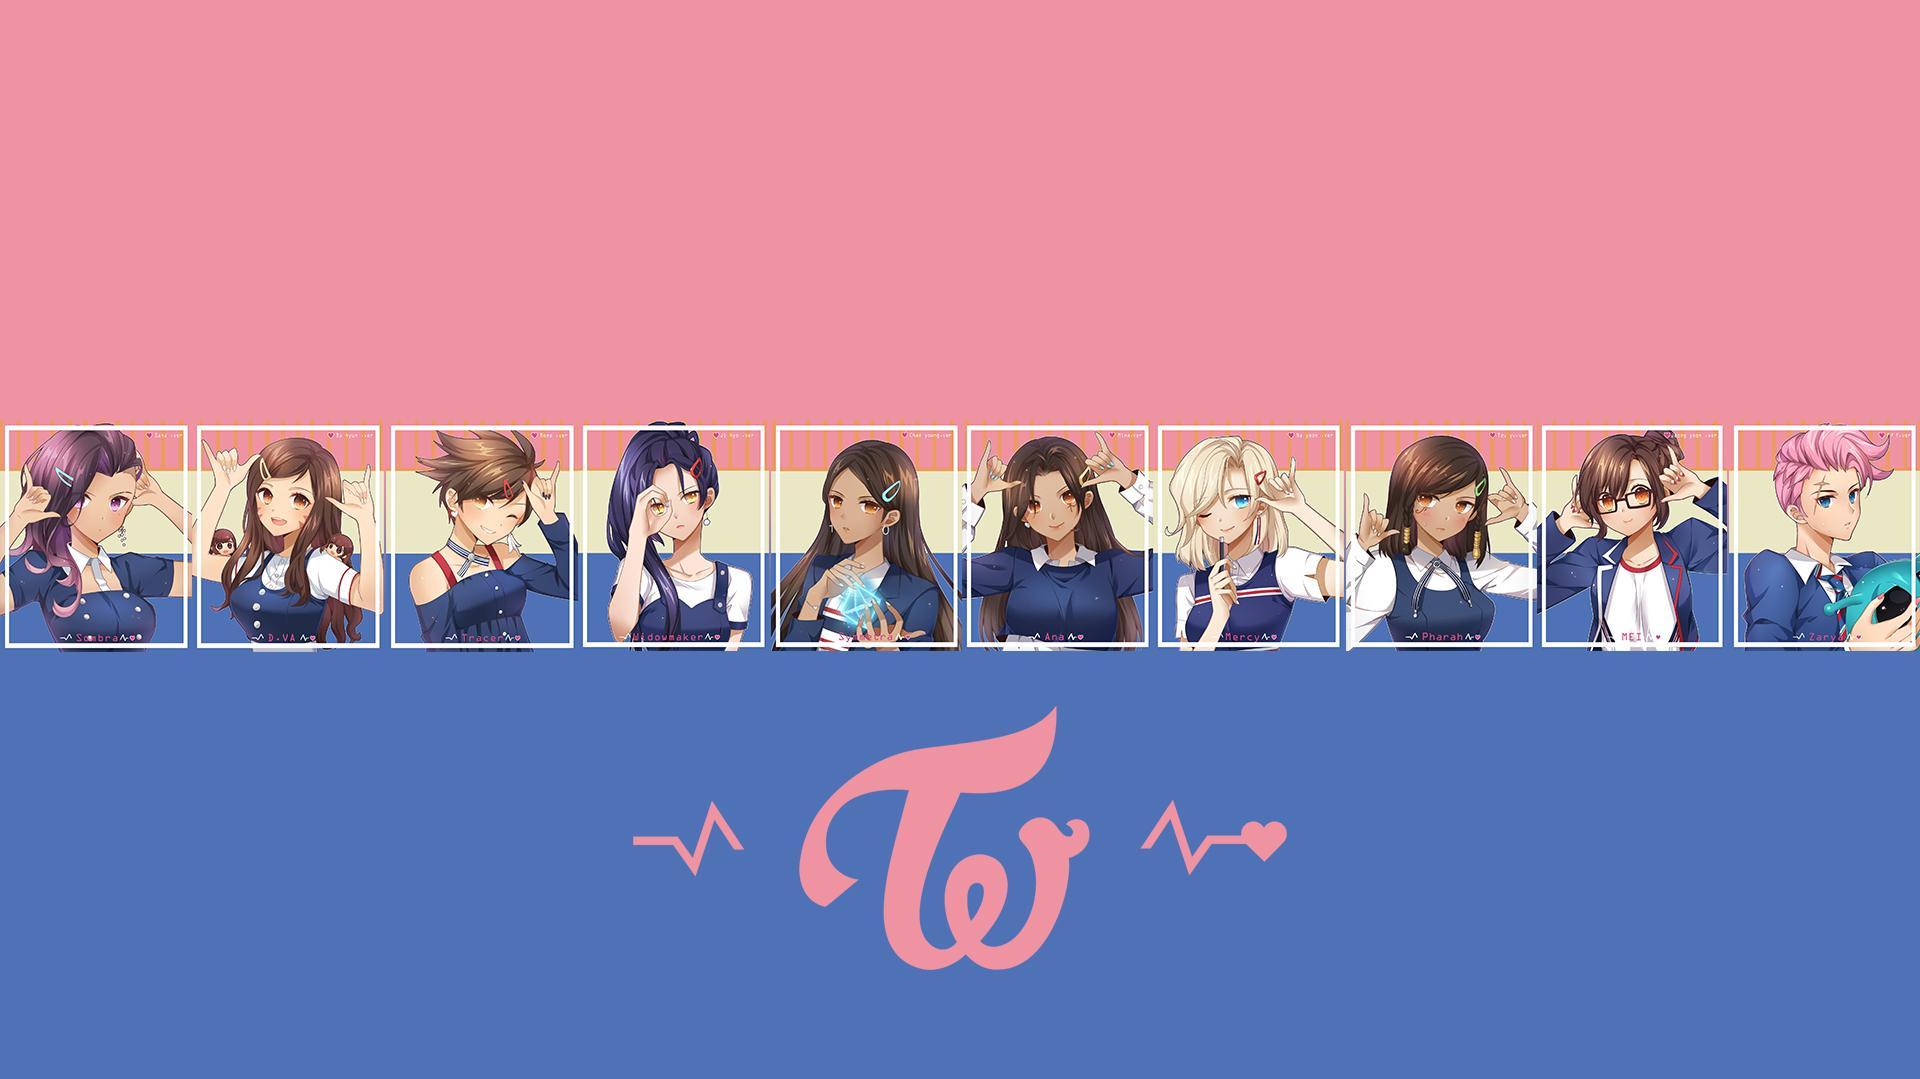 I made a Signal wallpaper with members of TWICE as Overwatch